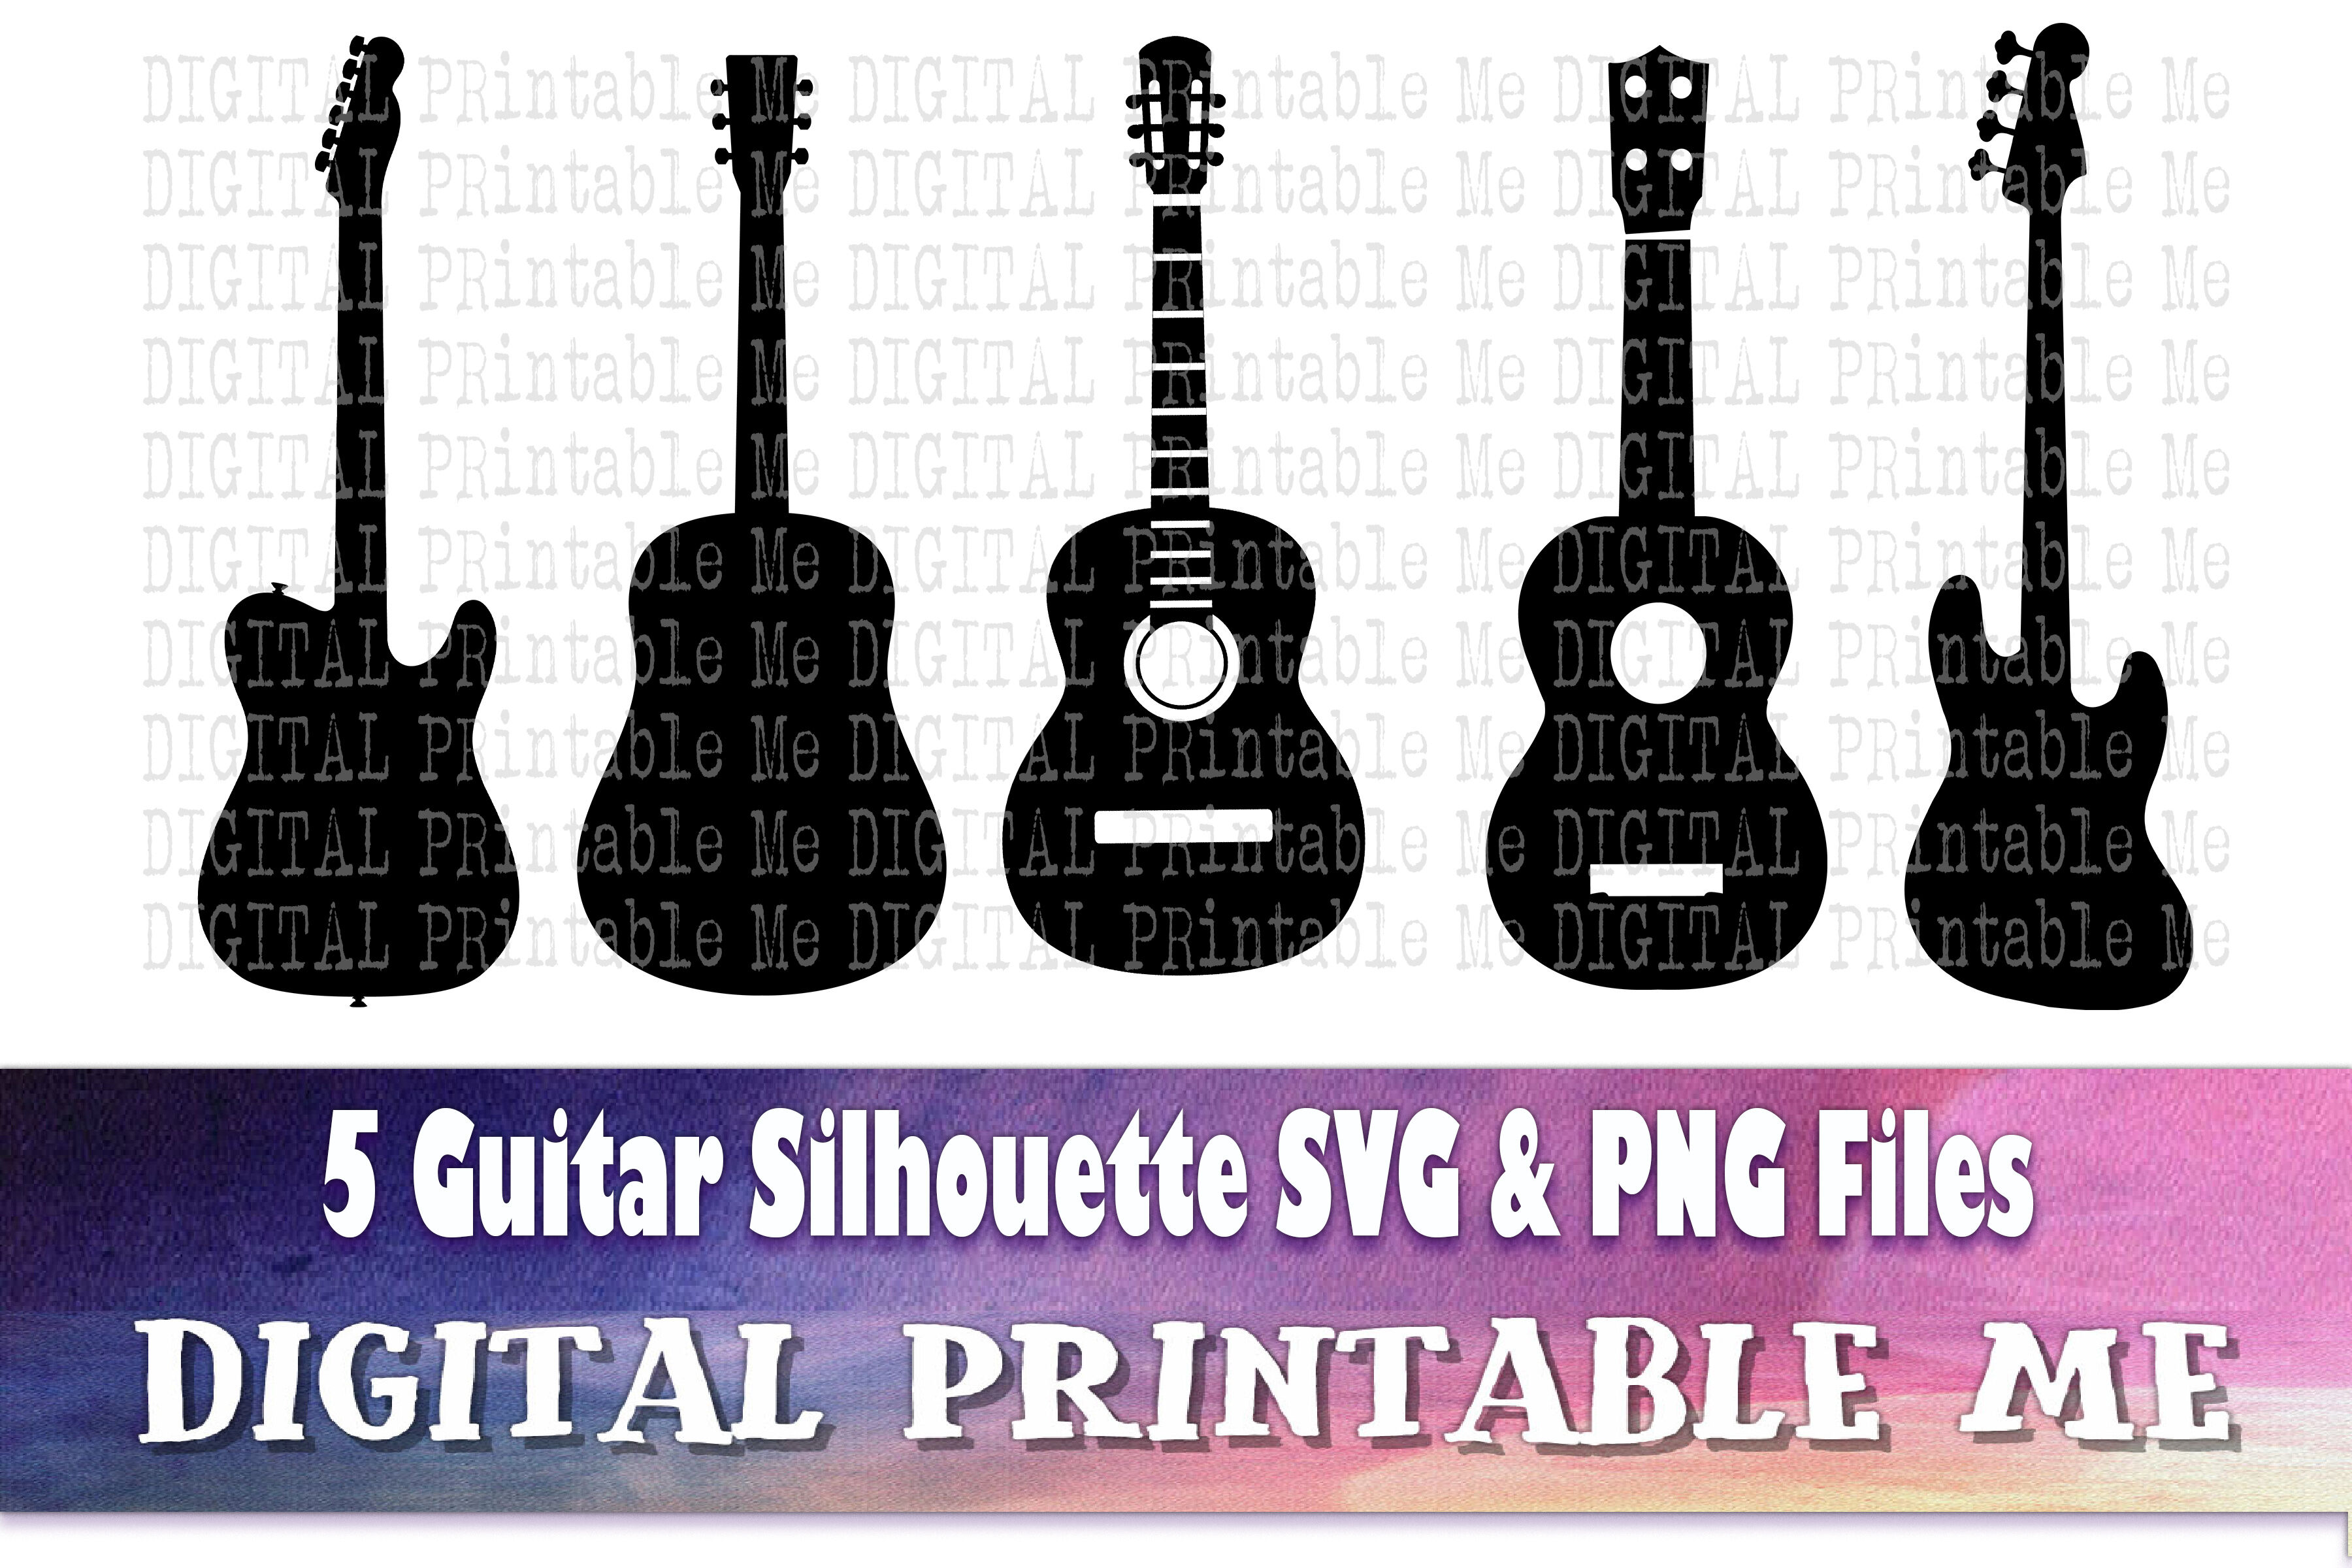 Download Guitar Silhouette Svg Png Clip Art Pack 5 Images Pack Instant By Digitalprintableme Thehungryjpeg Com